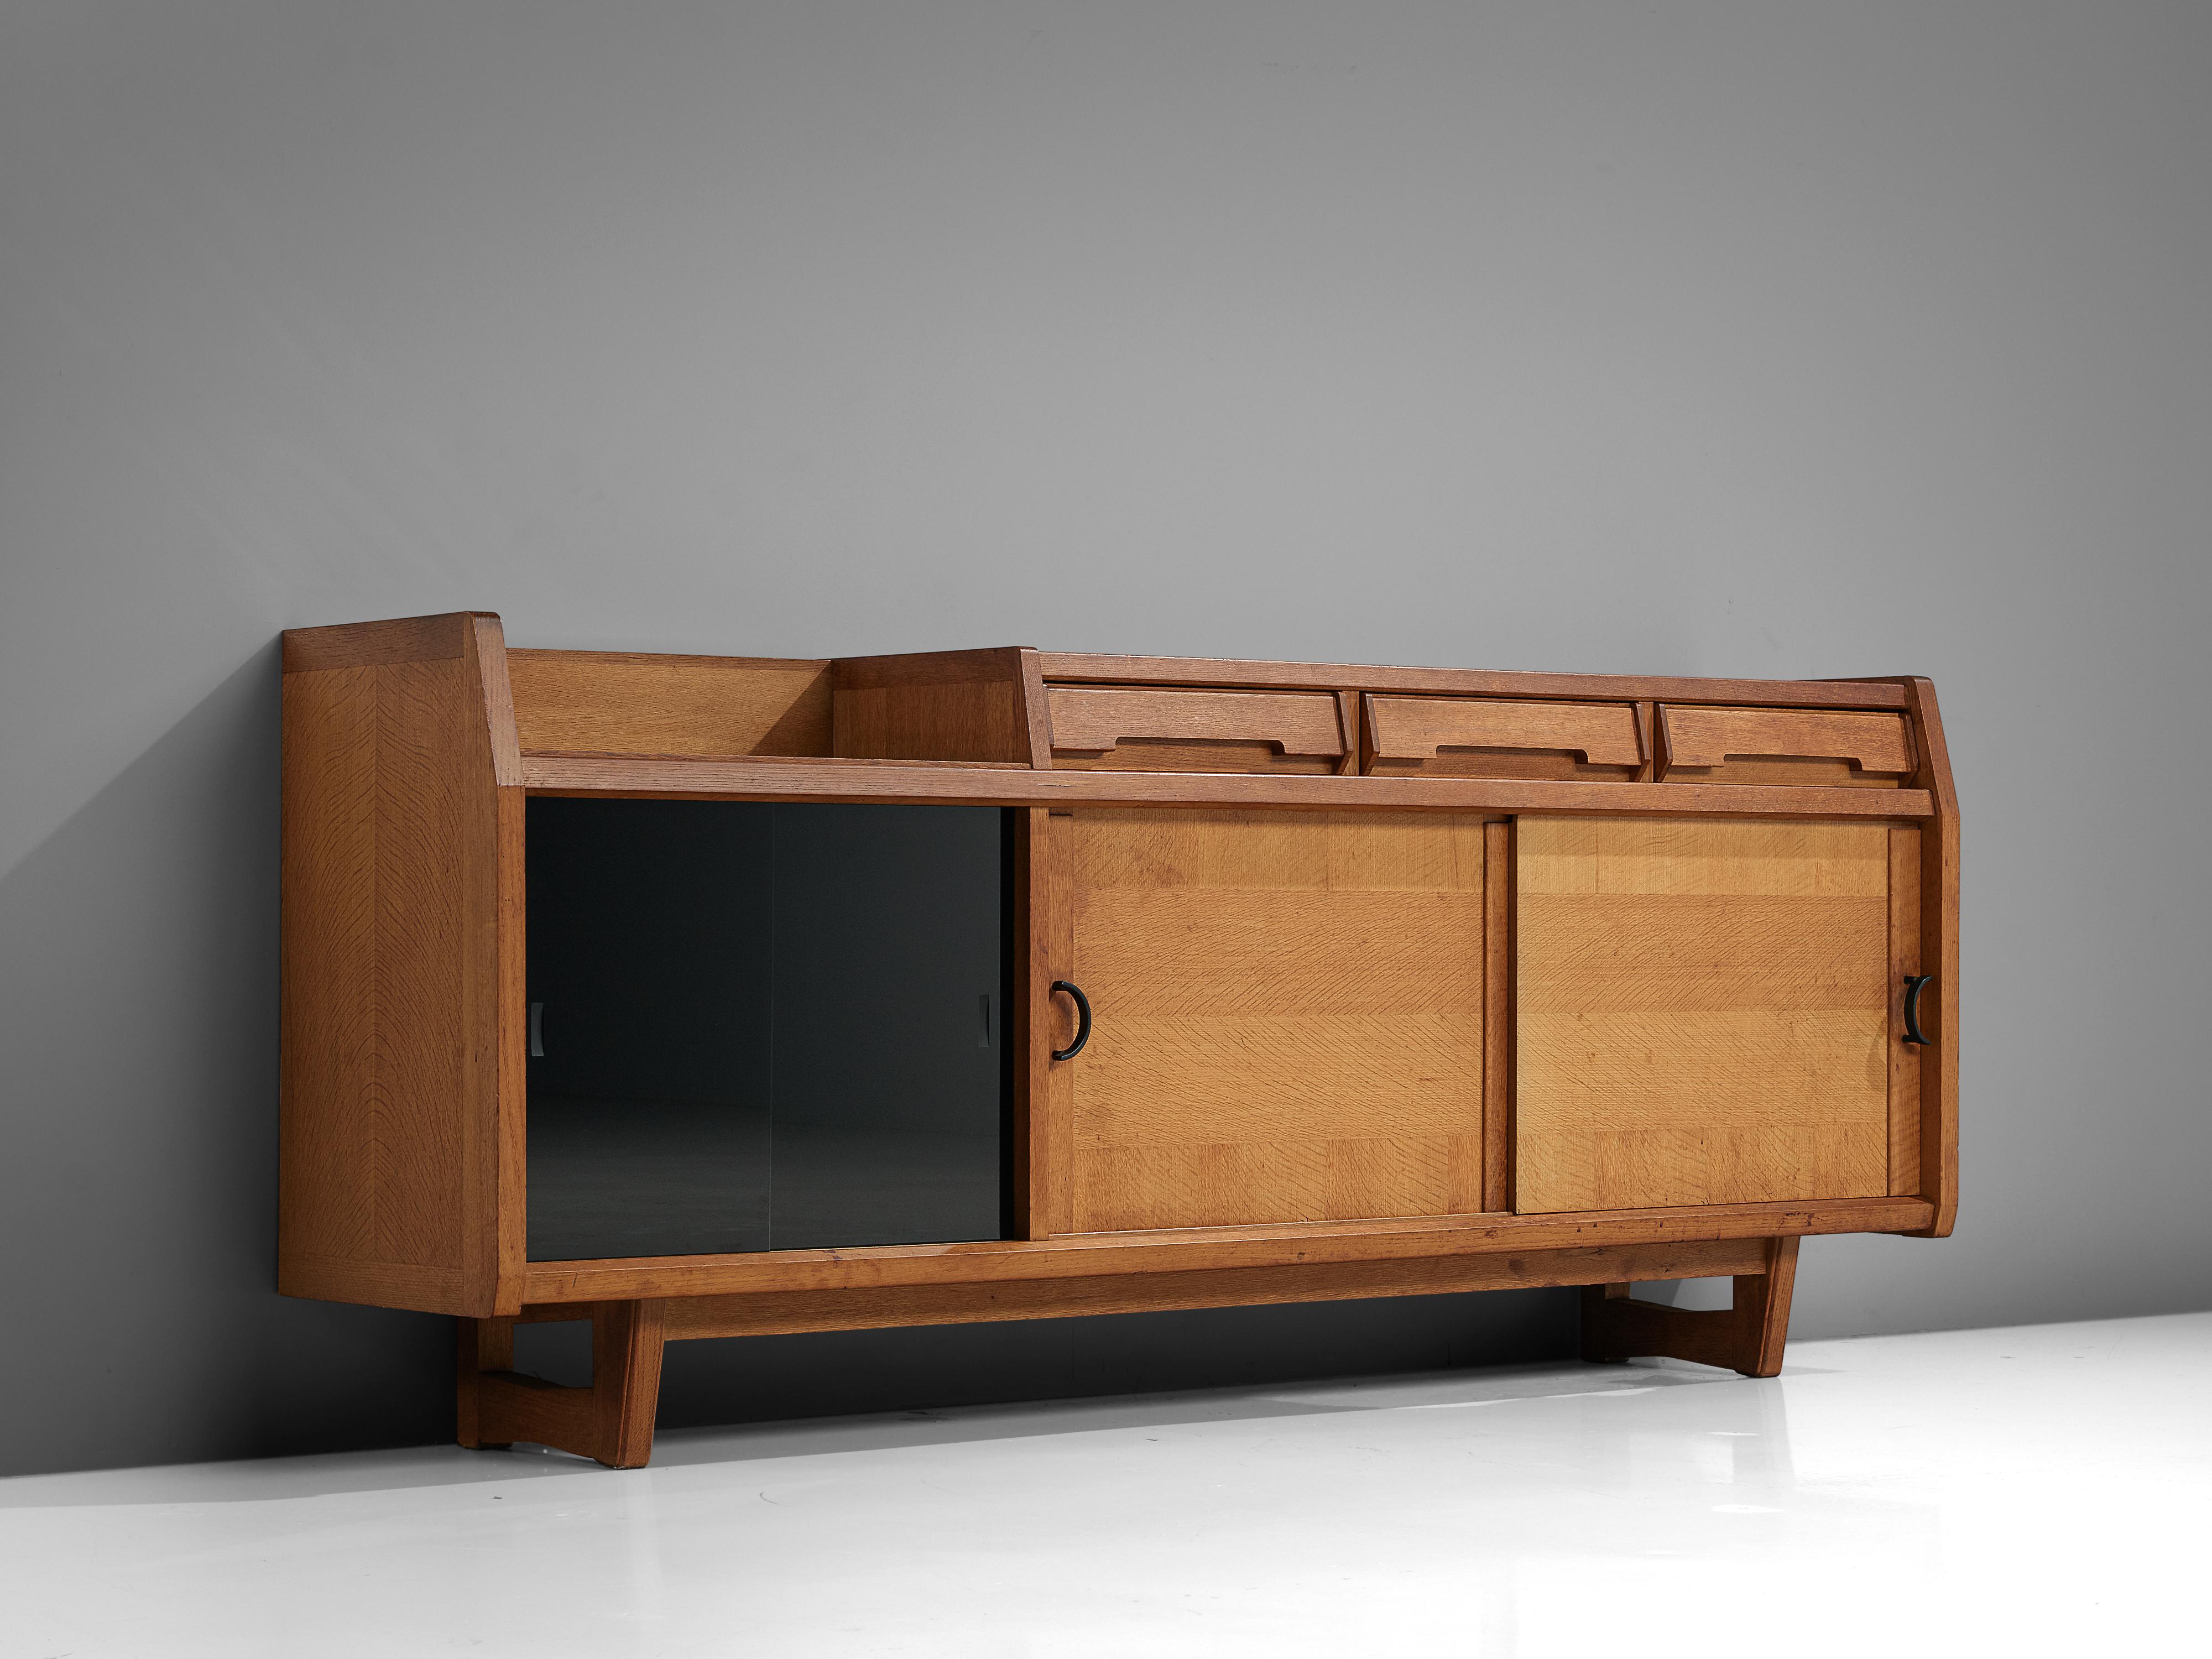 Guillerme et Chambron for Votre Maison, credenza, oak, France, 1960s

This sideboard is designed by the French designer duo Guillerme and Chambron. The piece is characterized by the solid oakwood and detailed plane divisions. Two horizontal sliding